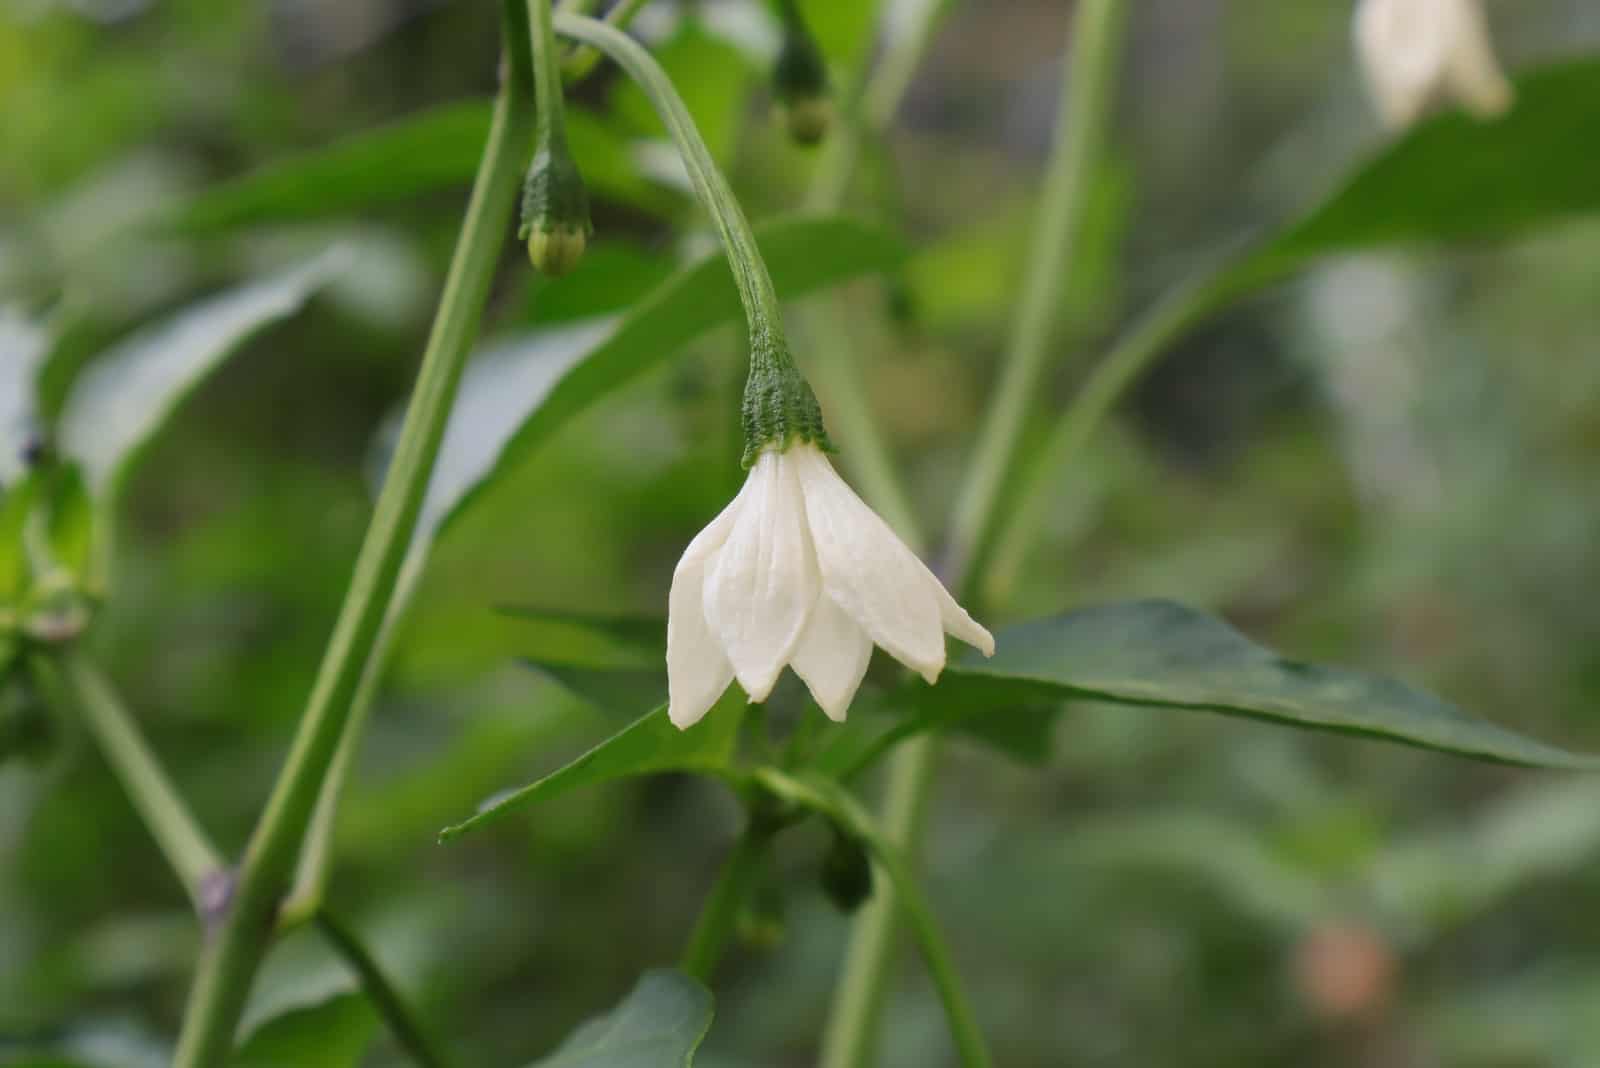 White flower of chili peppers hangs downwards from the stem